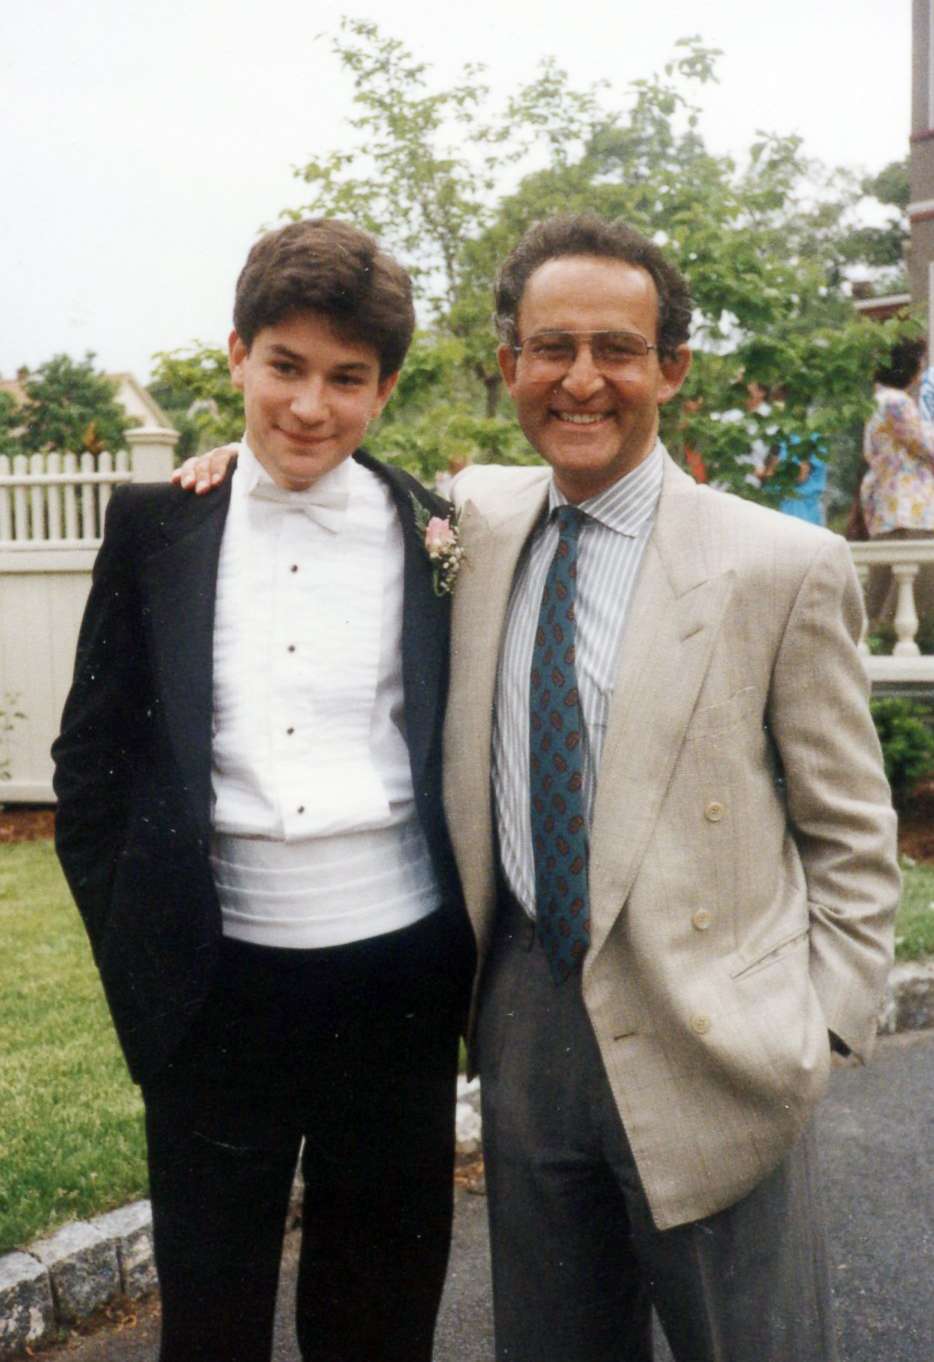 PHOTO: Dan Harris poses for a photo with his father at his senior prom in 1989.